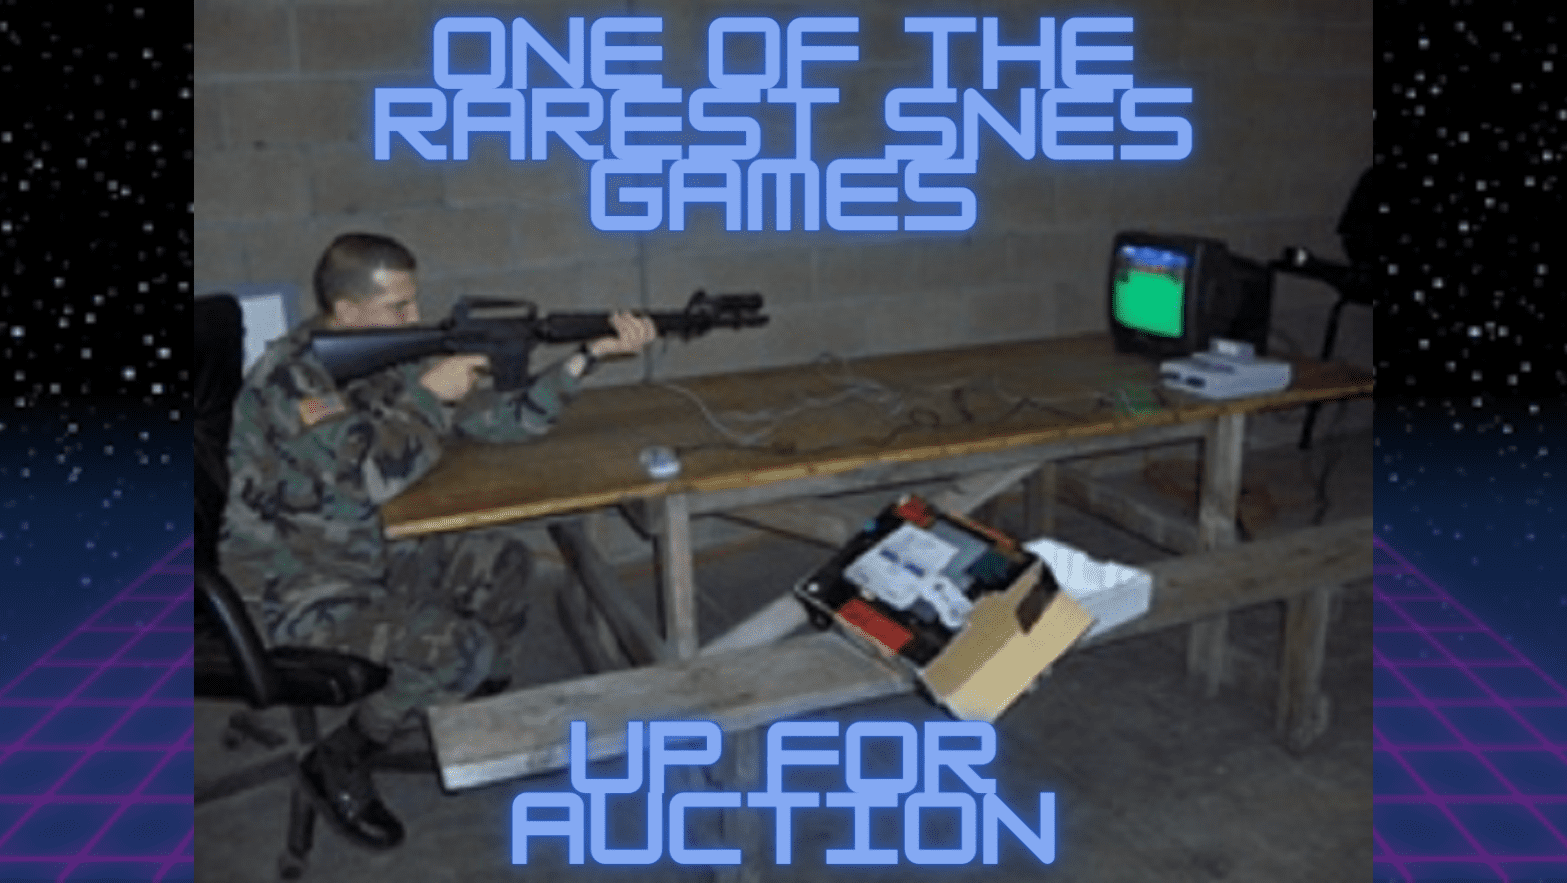 own-one-of-the-rarest-snes-games